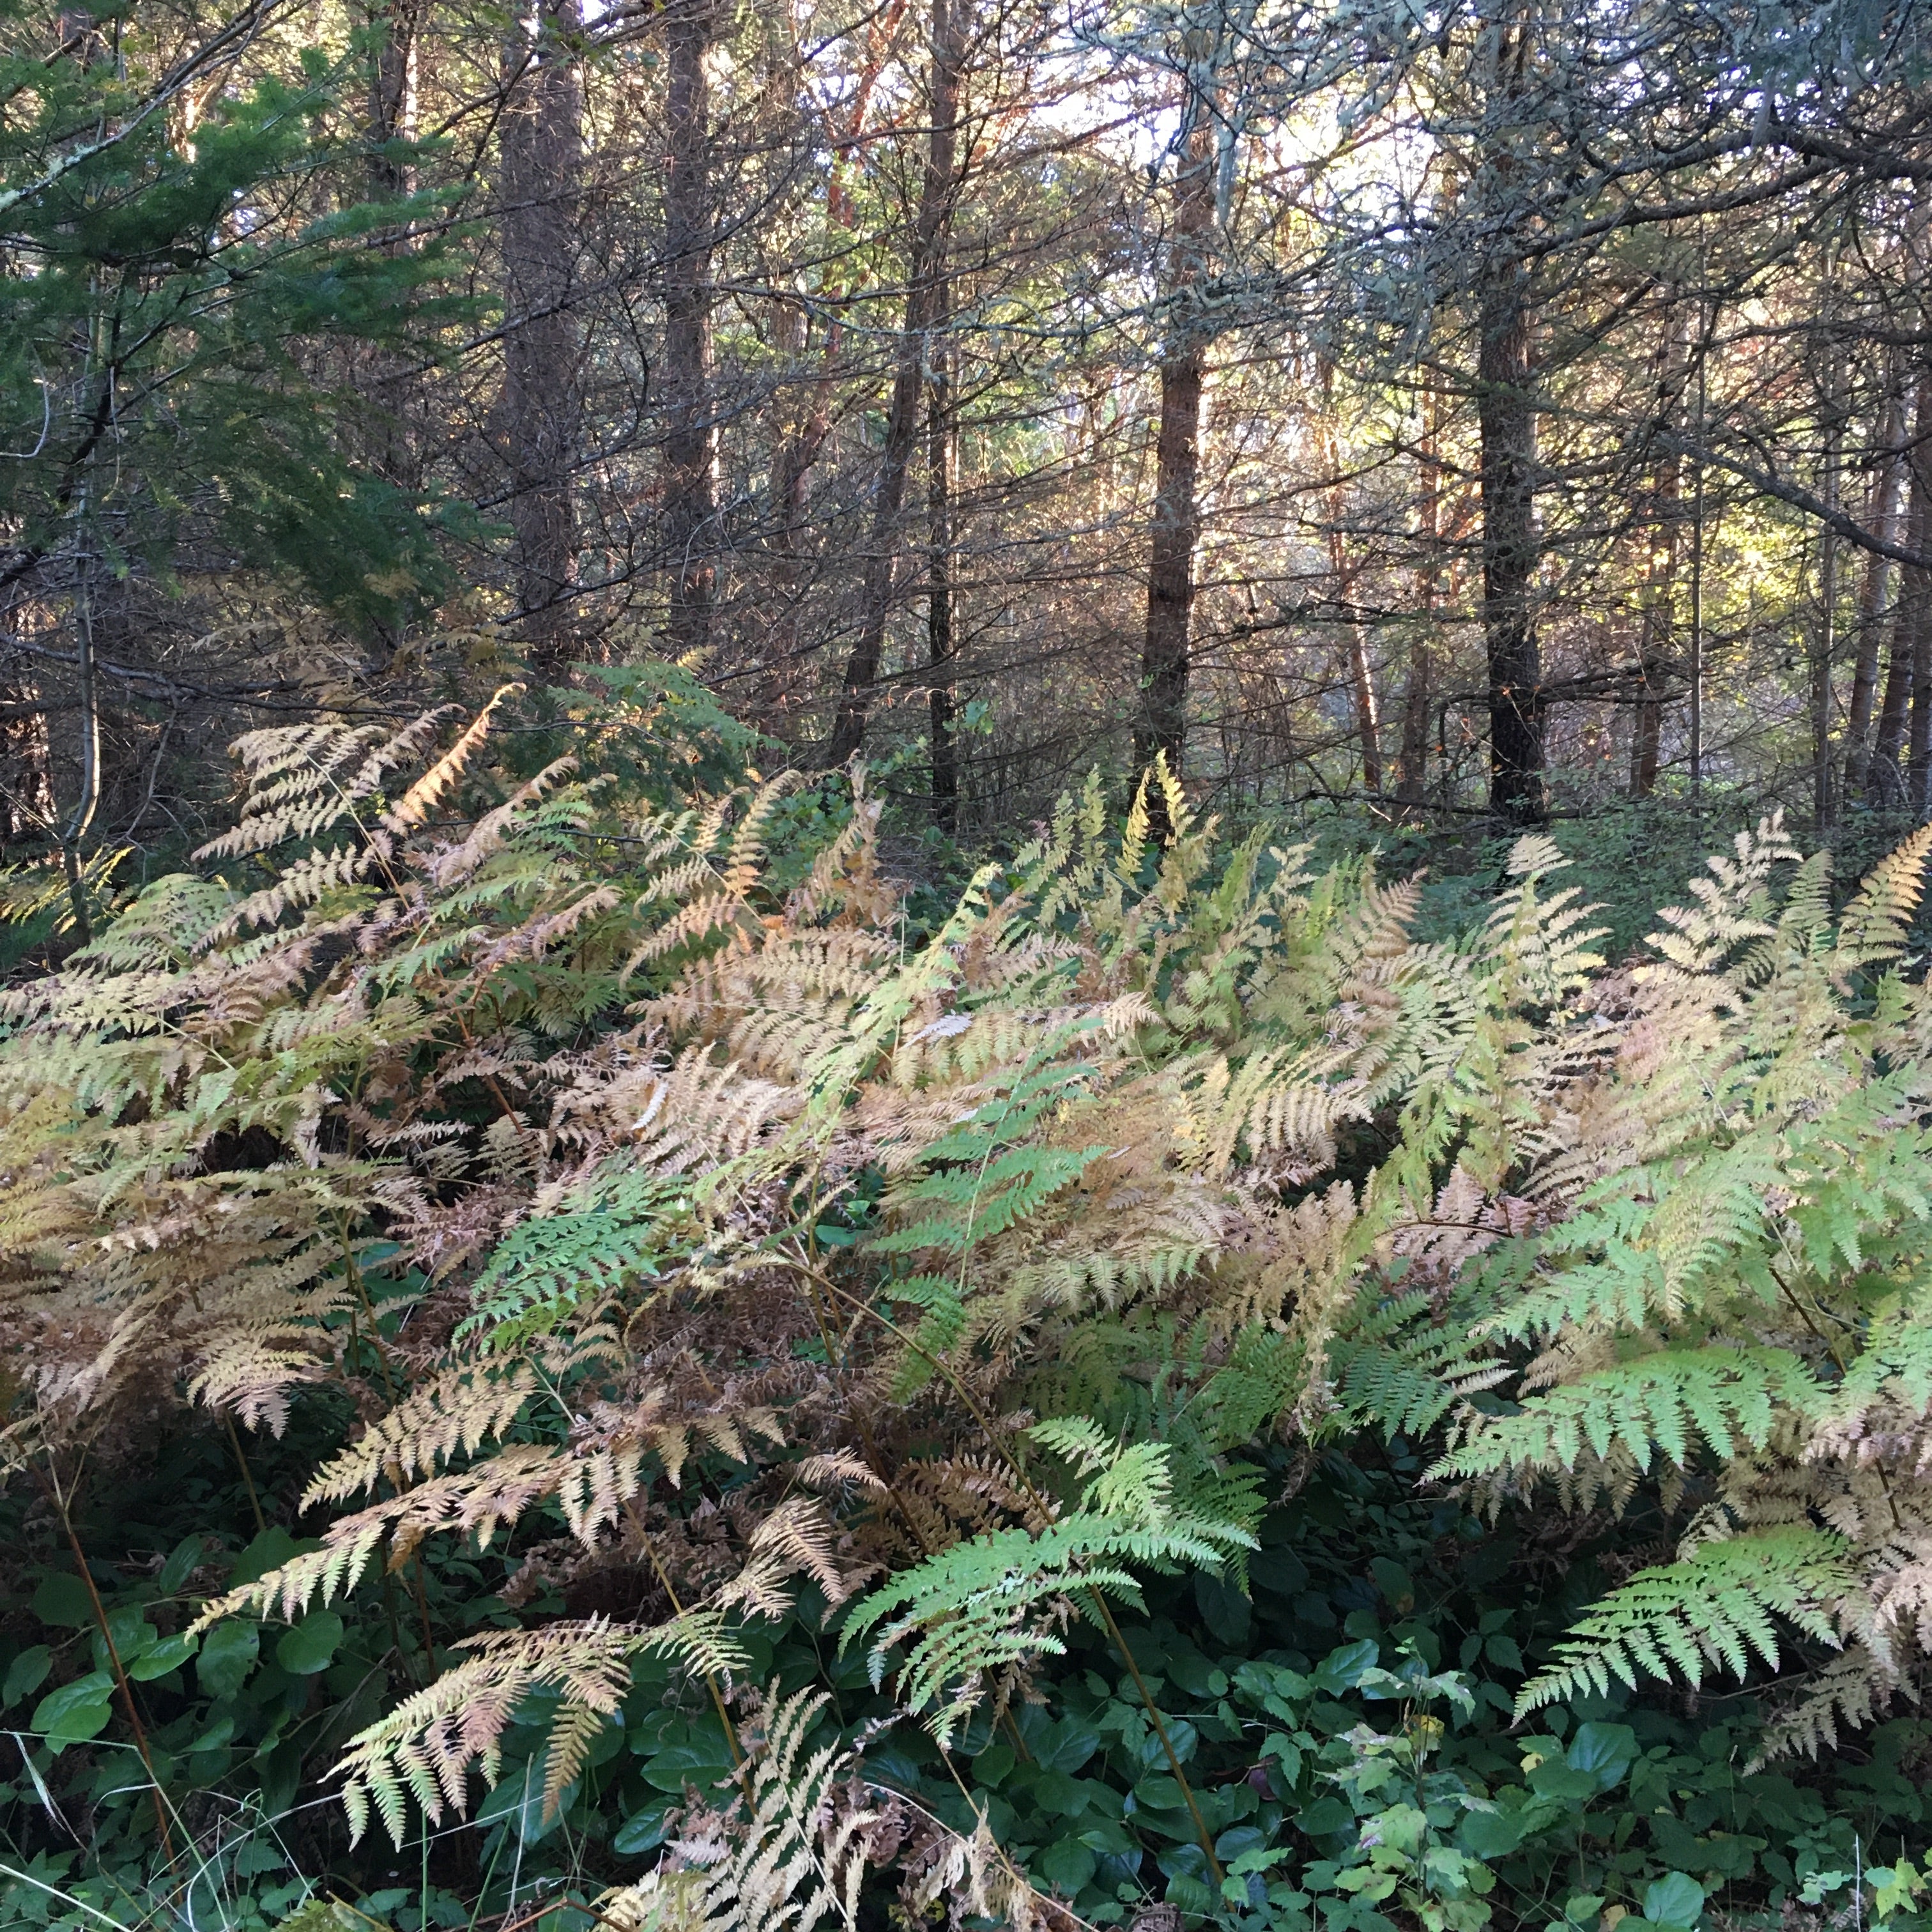 sun shining through the woods with ferns in the foreground